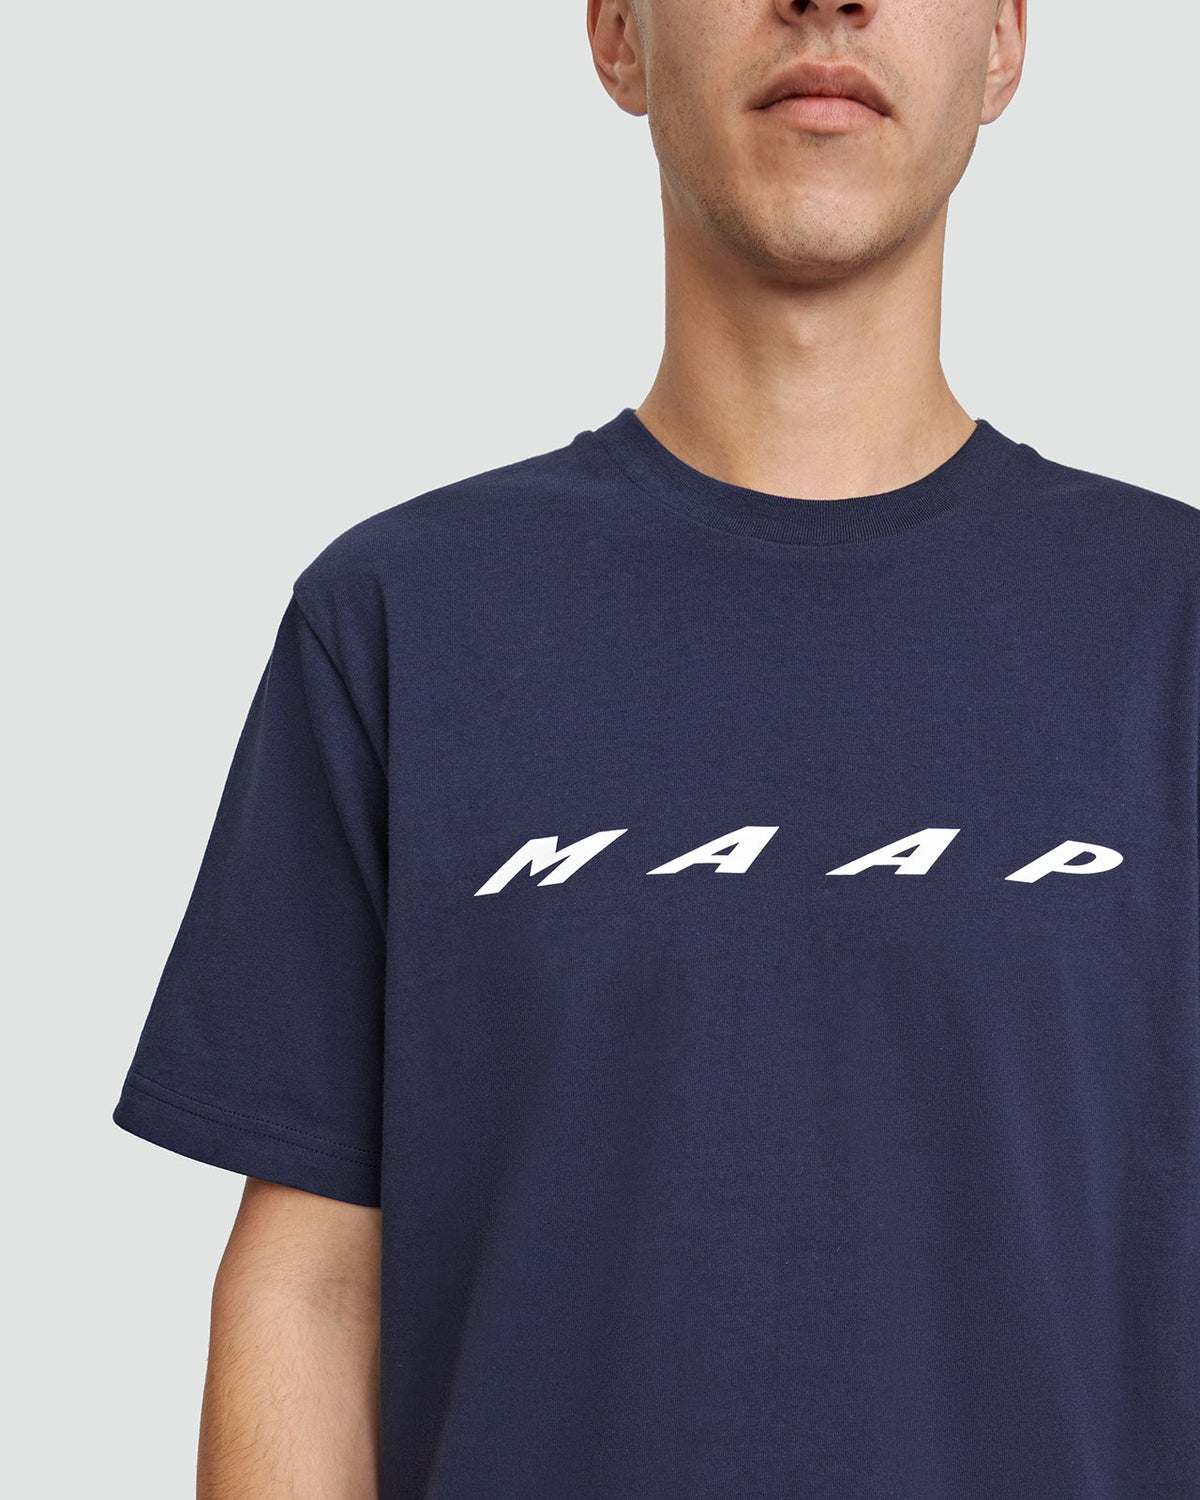 MAAP Evade Navy サイクル Tシャツ | CYCLISM